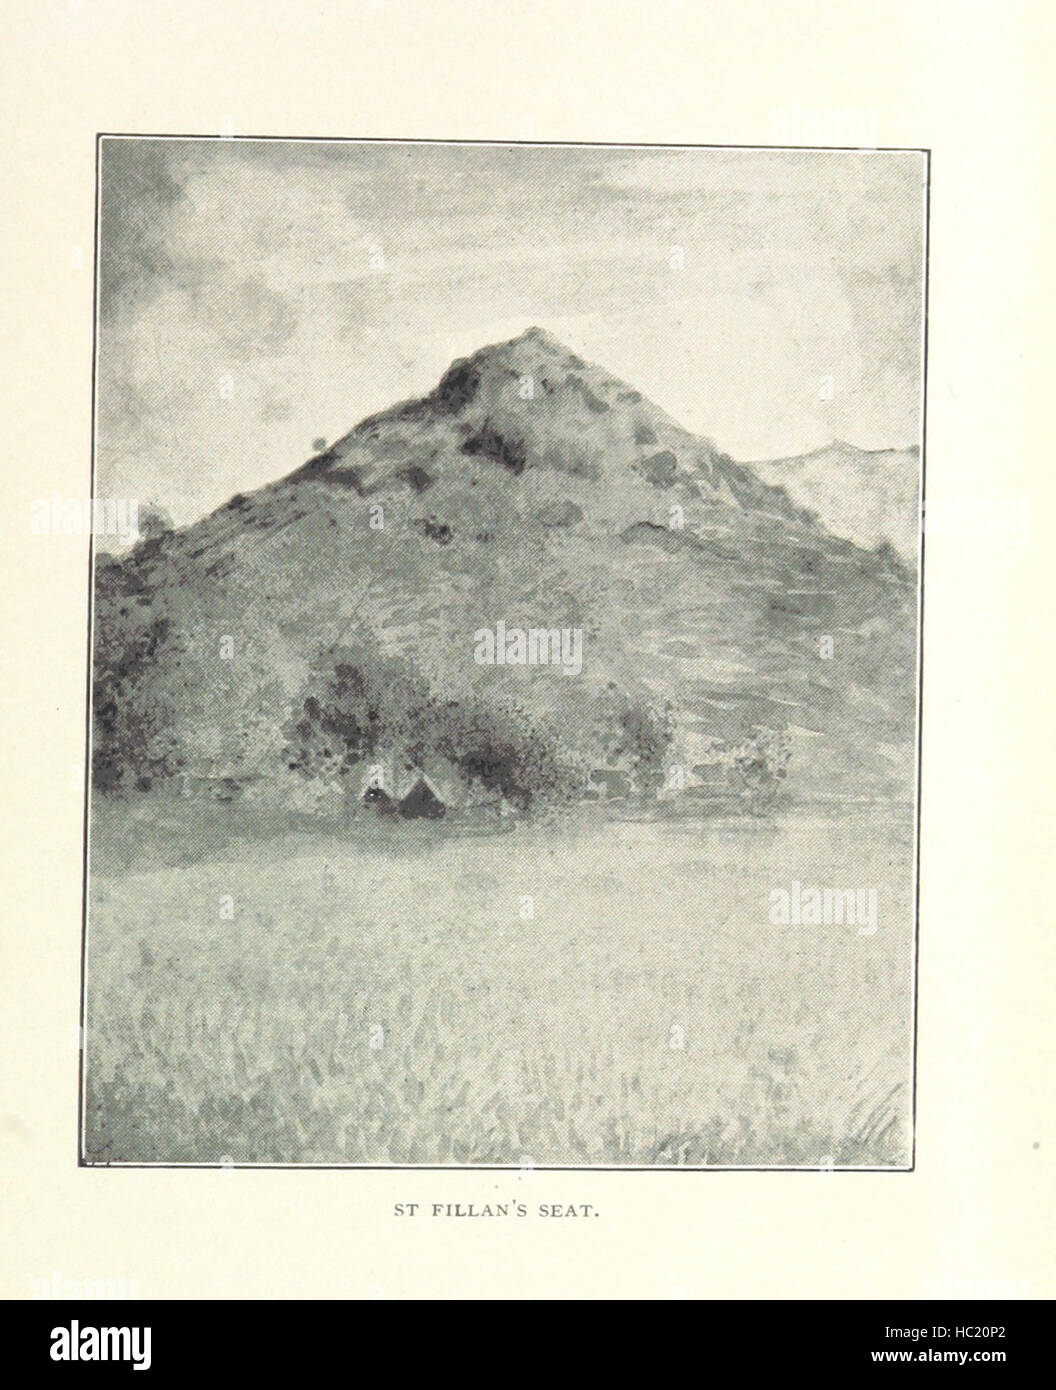 Image taken from page 251 of 'Chronicles of Strathearn. With illustrations by W. B. Macdougall, etc' Image taken from page 251 of 'Chronicles of Strathearn With Stock Photo